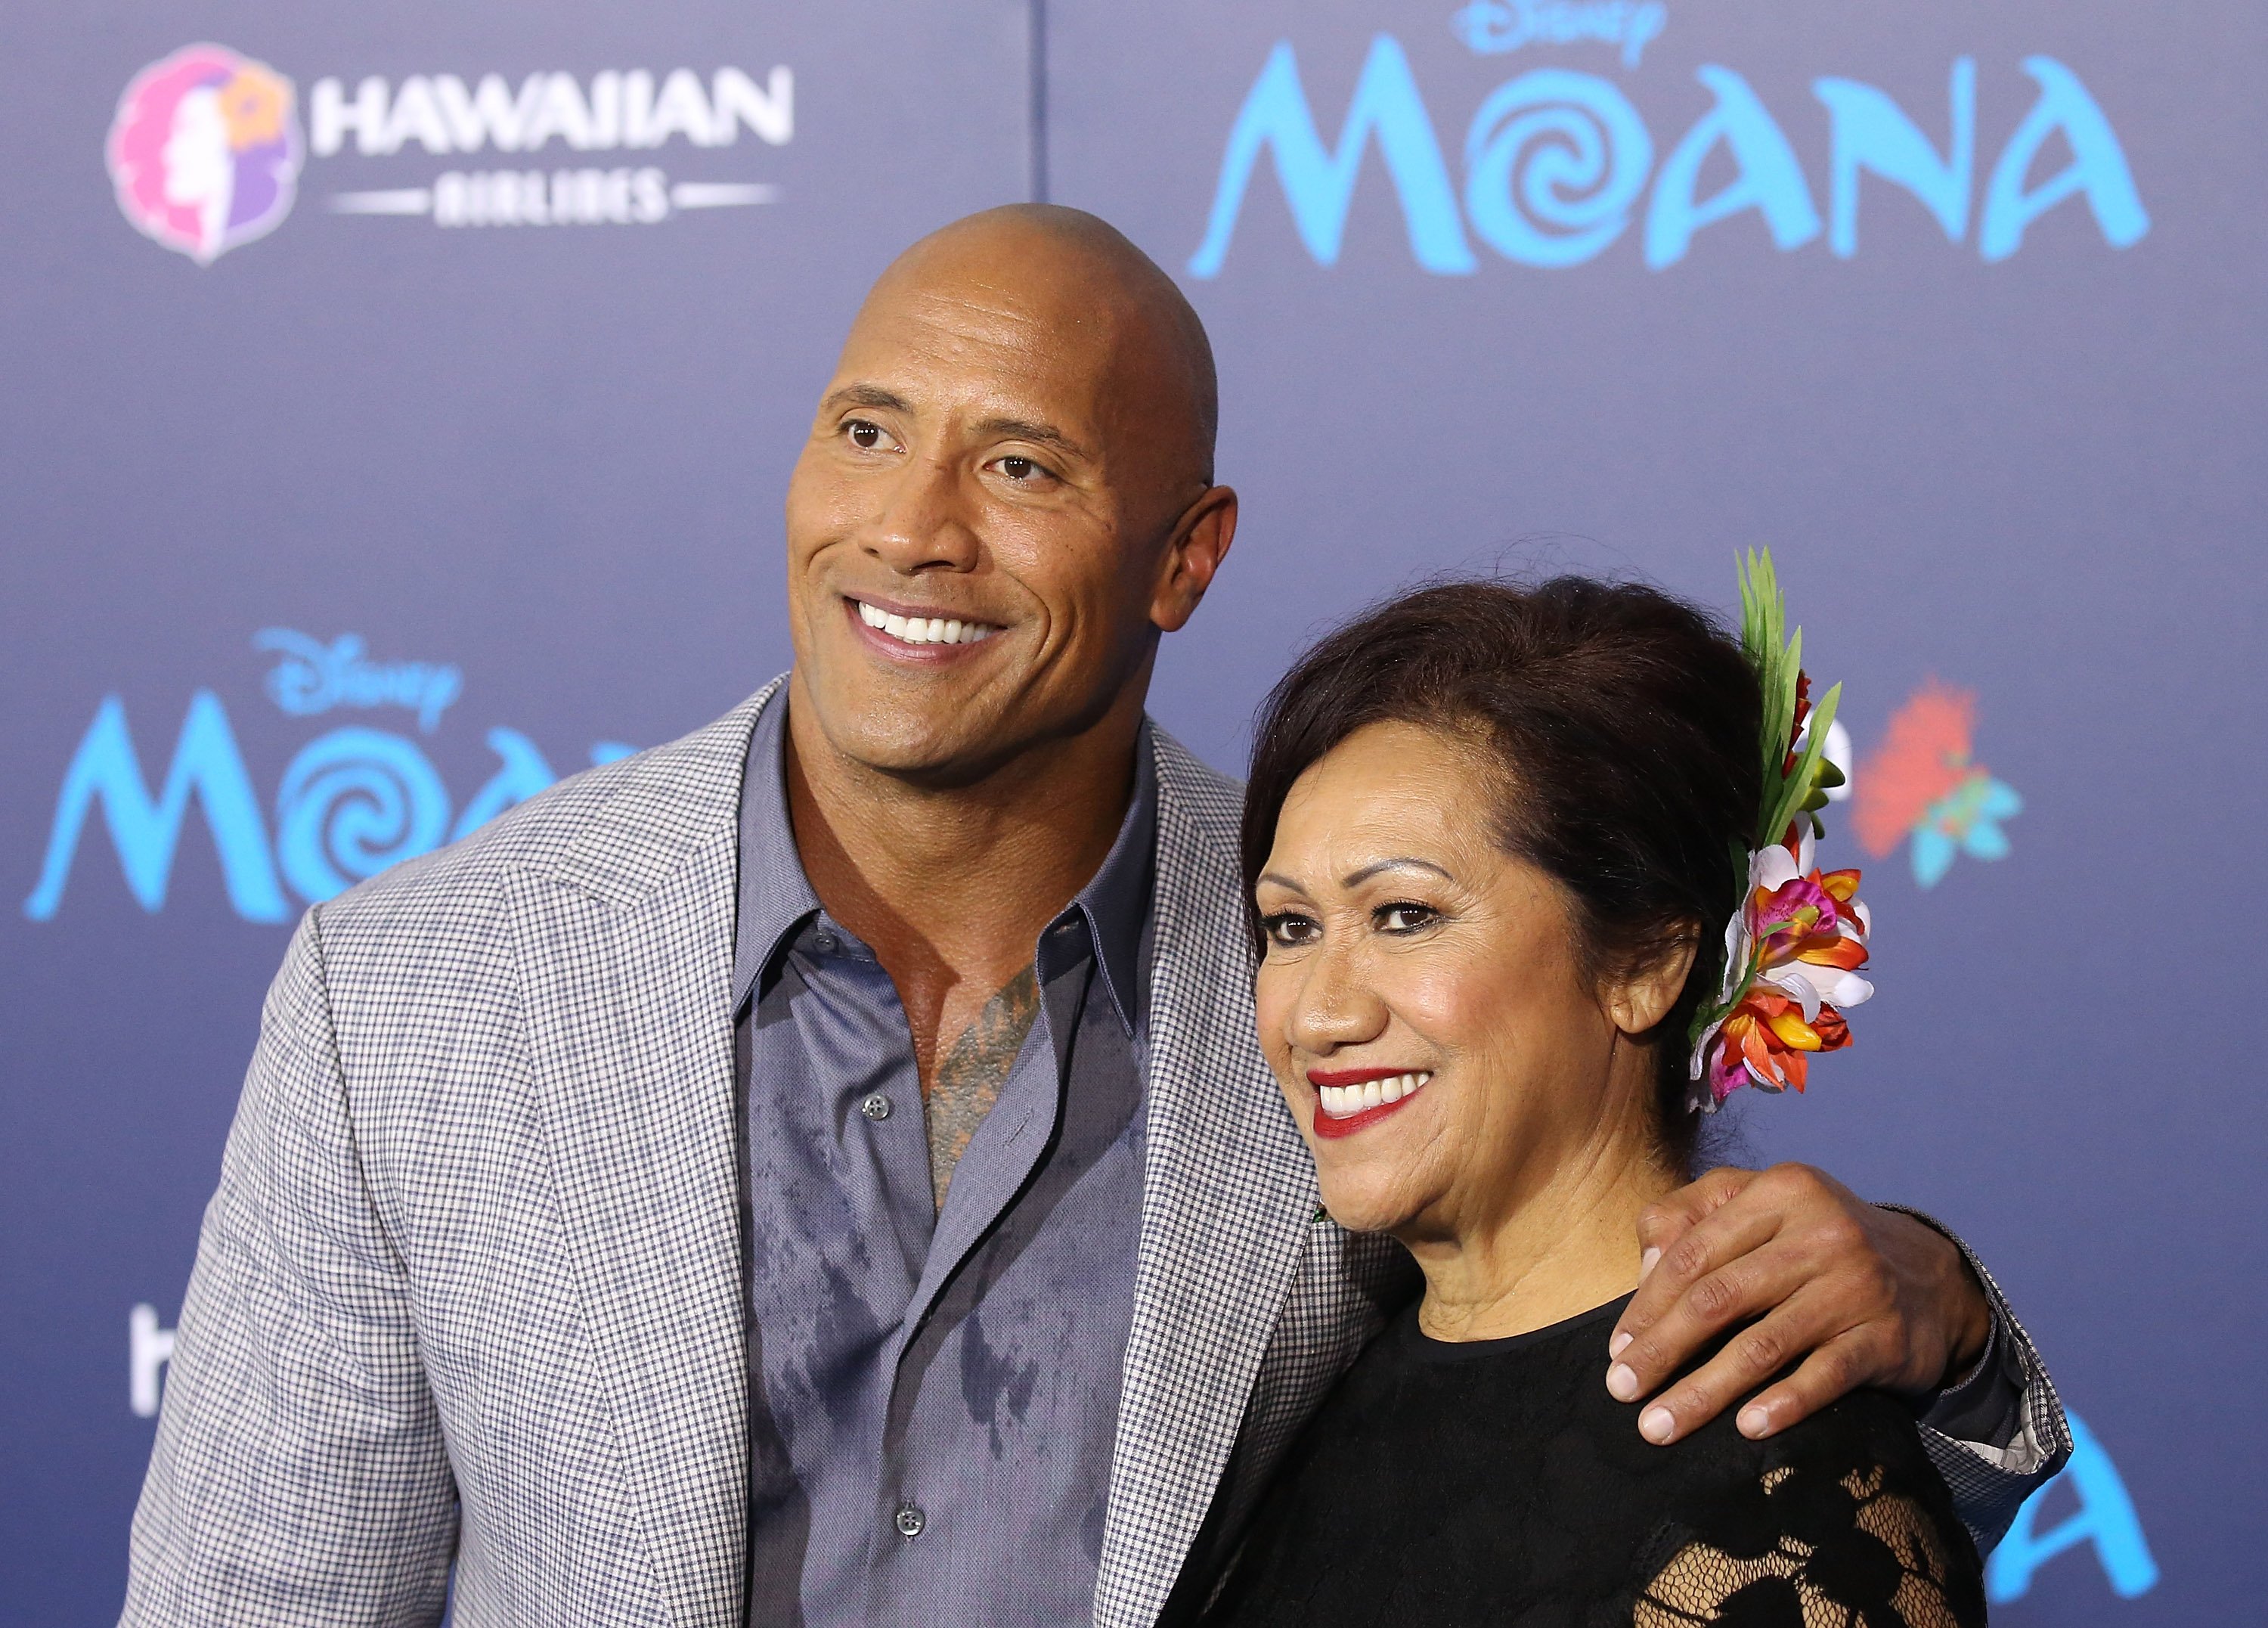 Dwayne Johnson and his mom, Ata Johnson, attend the "Moana" premiere the El Capitan Theatre on November 14, 2016 in Hollywood, California.| Source: Getty Images